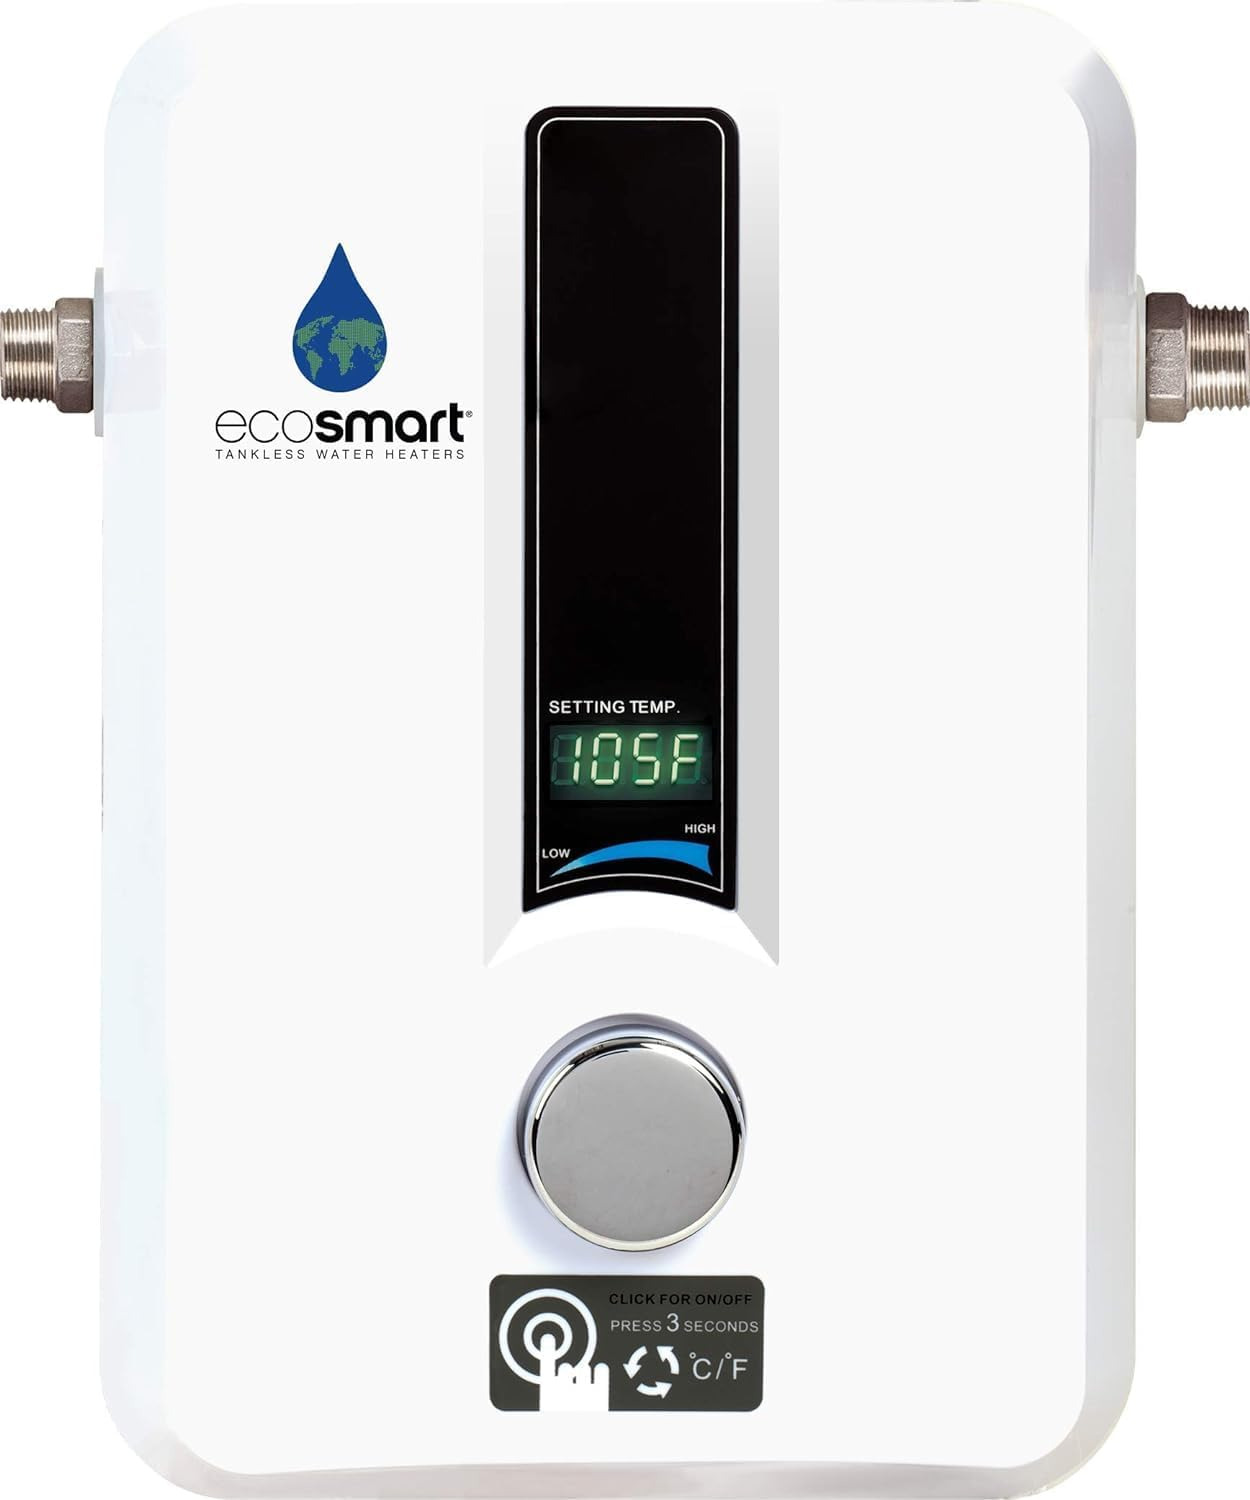 Ecosmart ECO 11 Electric Tankless Water Heater, 13KW at 240 Volts with Patented 